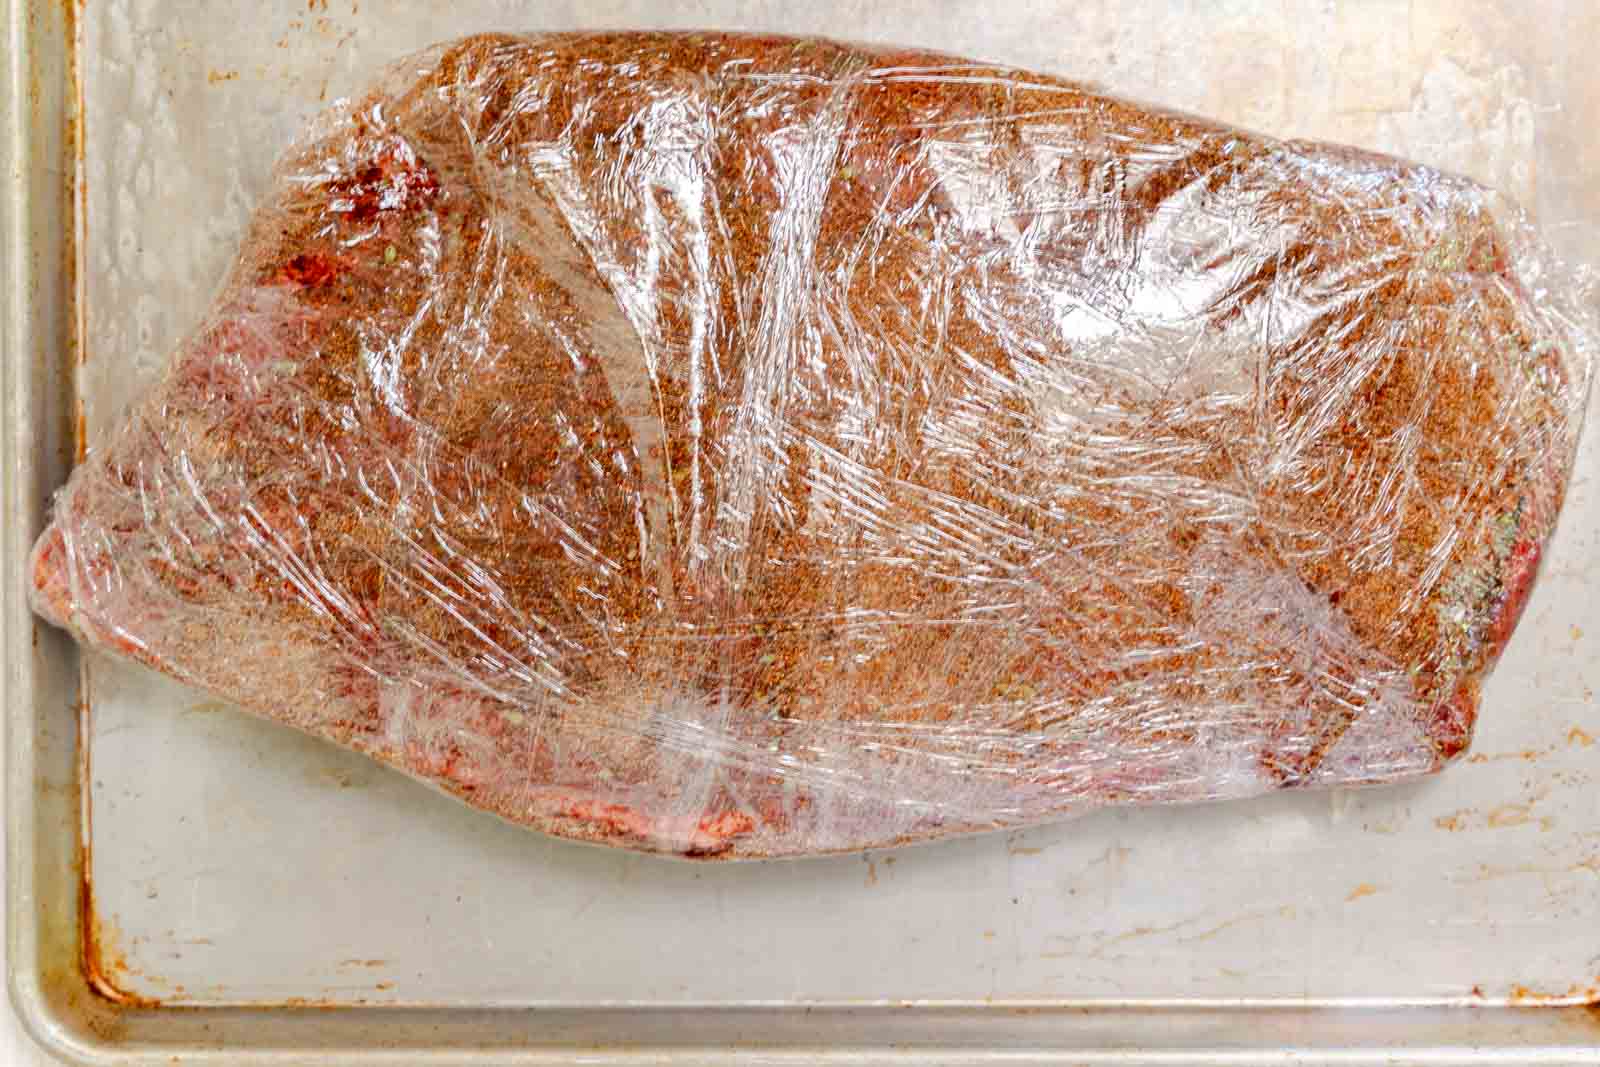 A tightly wrapped beef brisket in plastic wrap sitting on a baking sheet.